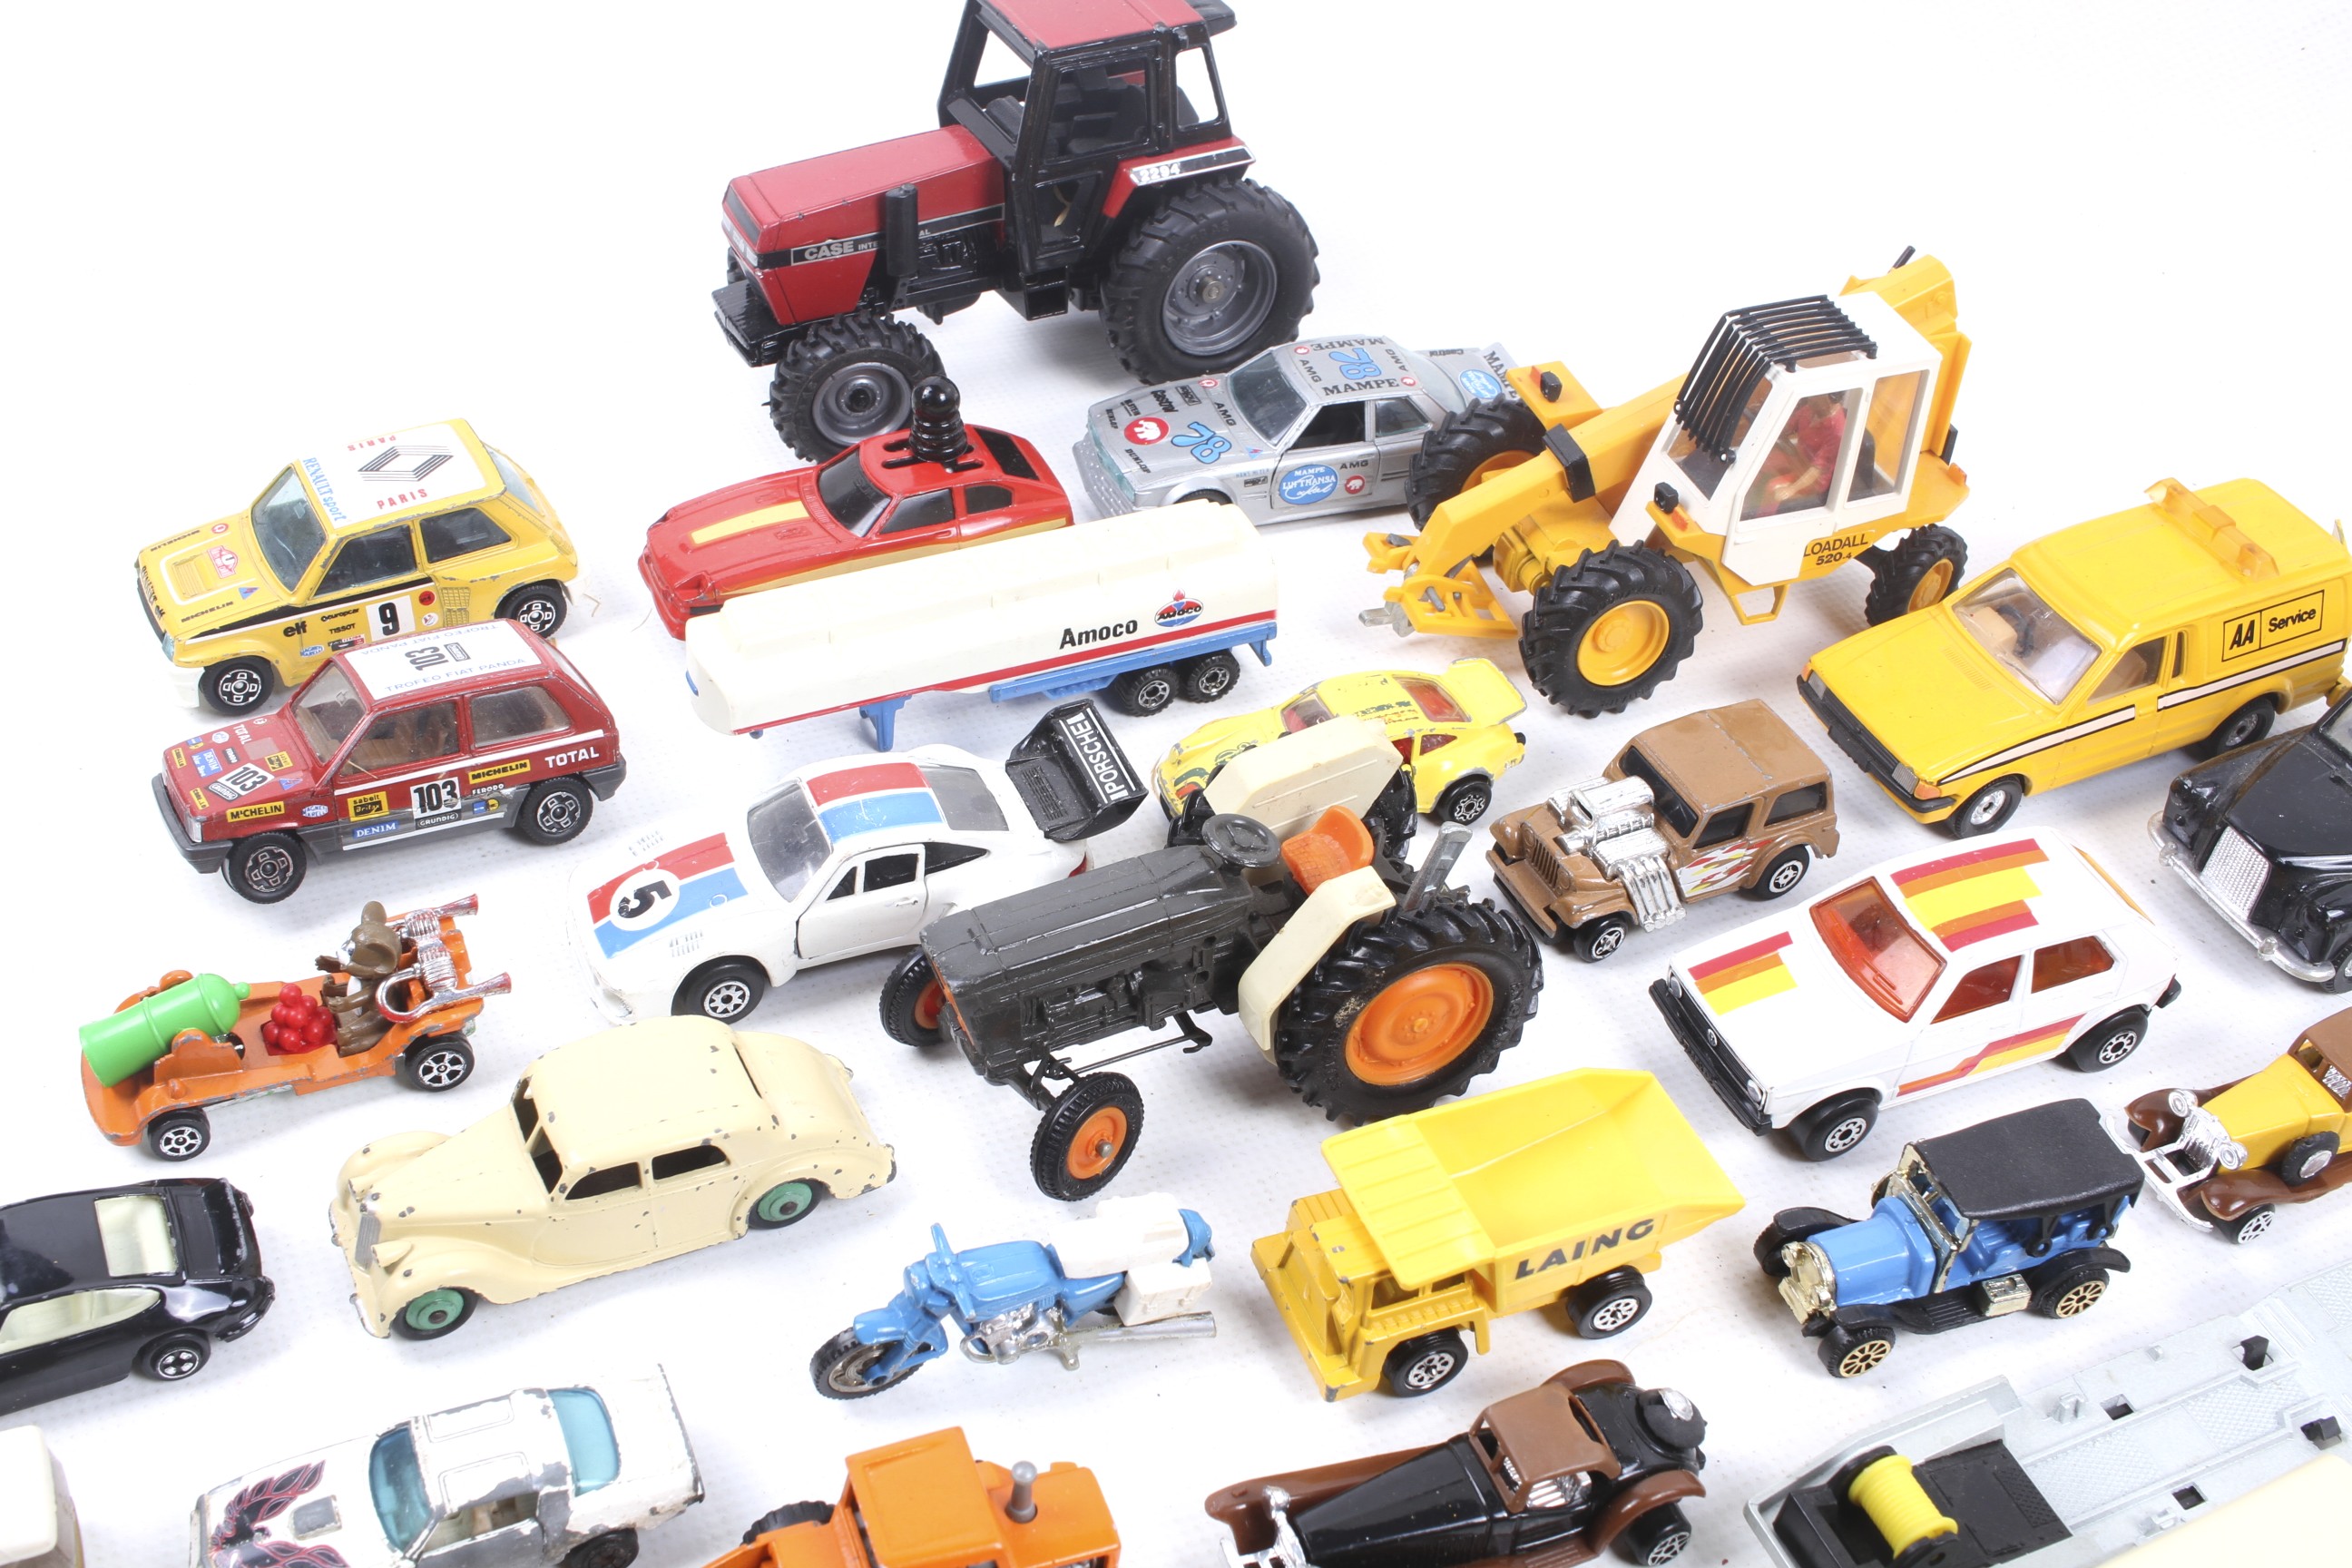 A collection of unboxed diecast vehicles. - Image 2 of 3